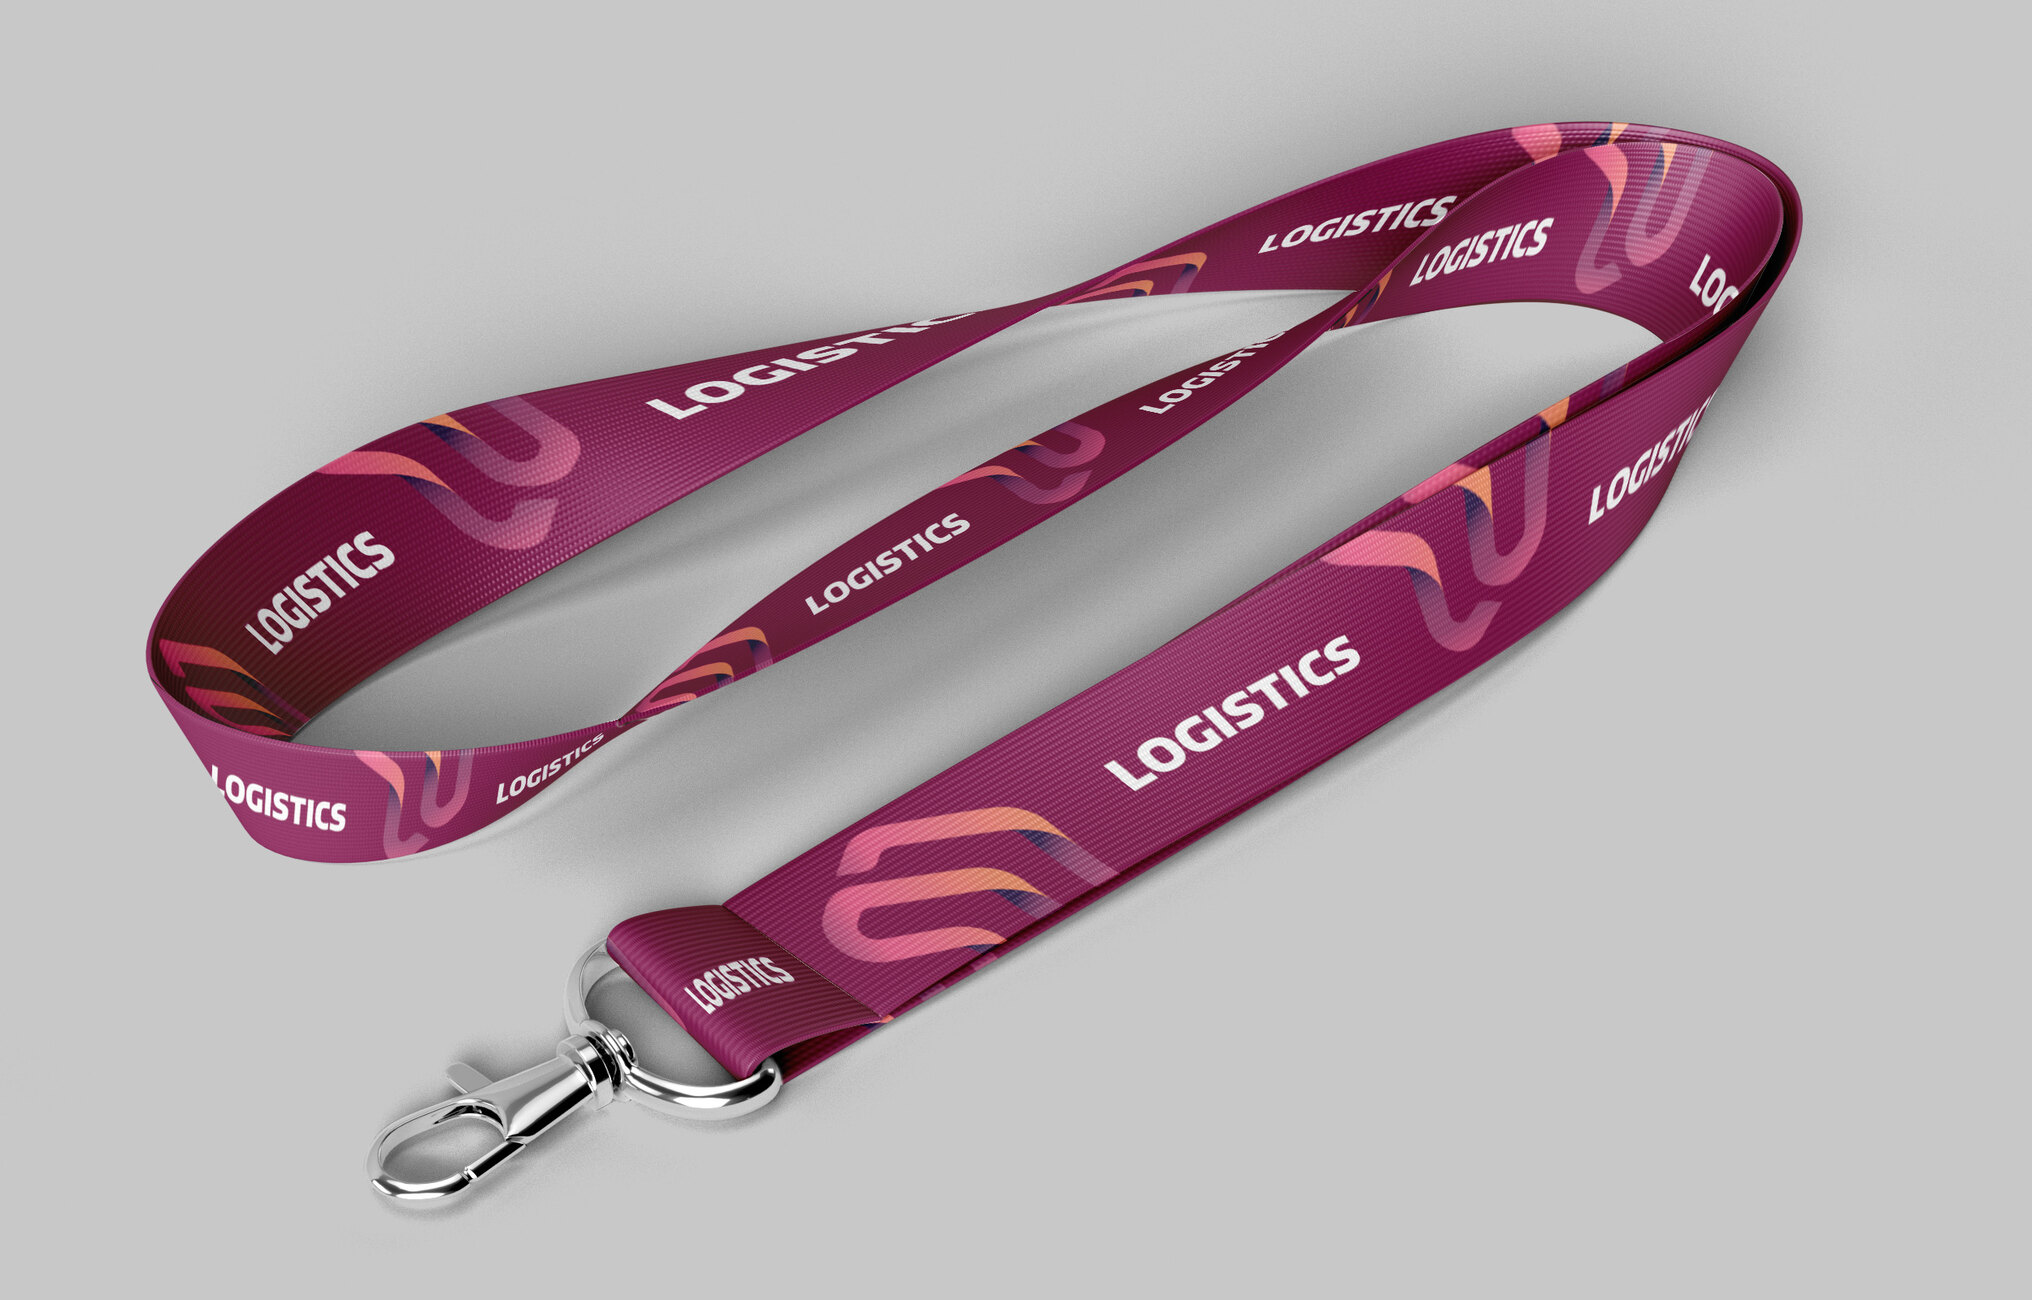 Unlocking The Secrets: Proper Techniques For Opening Lanyards